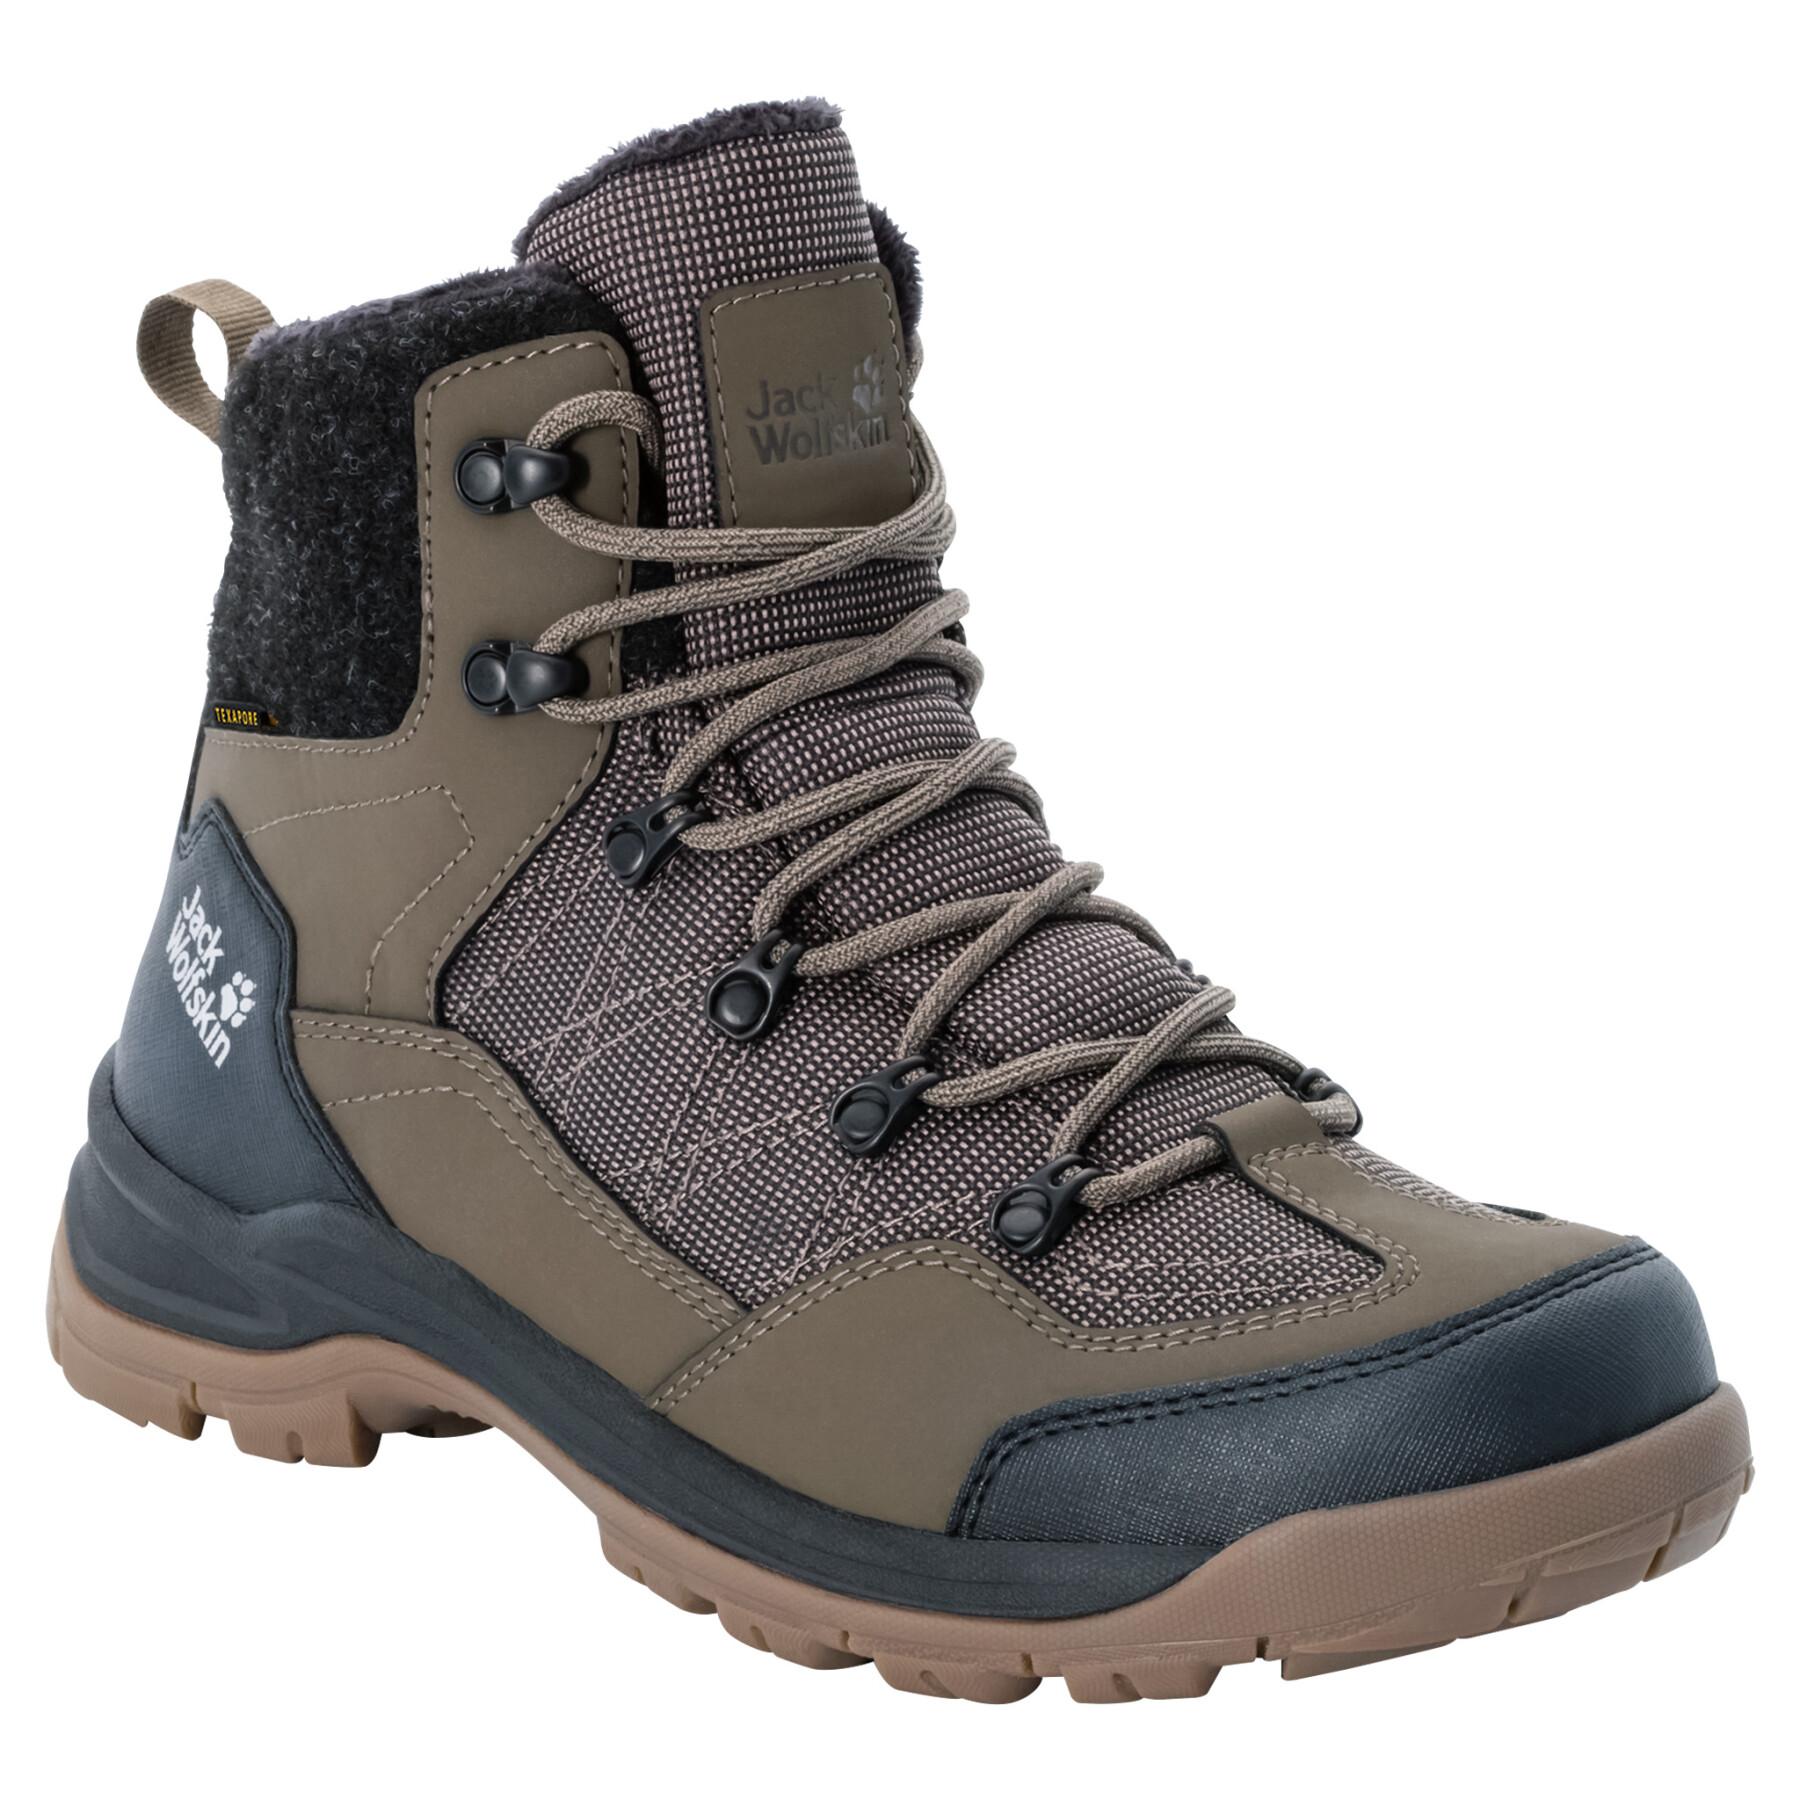 Shoes Jack Wolfskin cold bay texapore mid